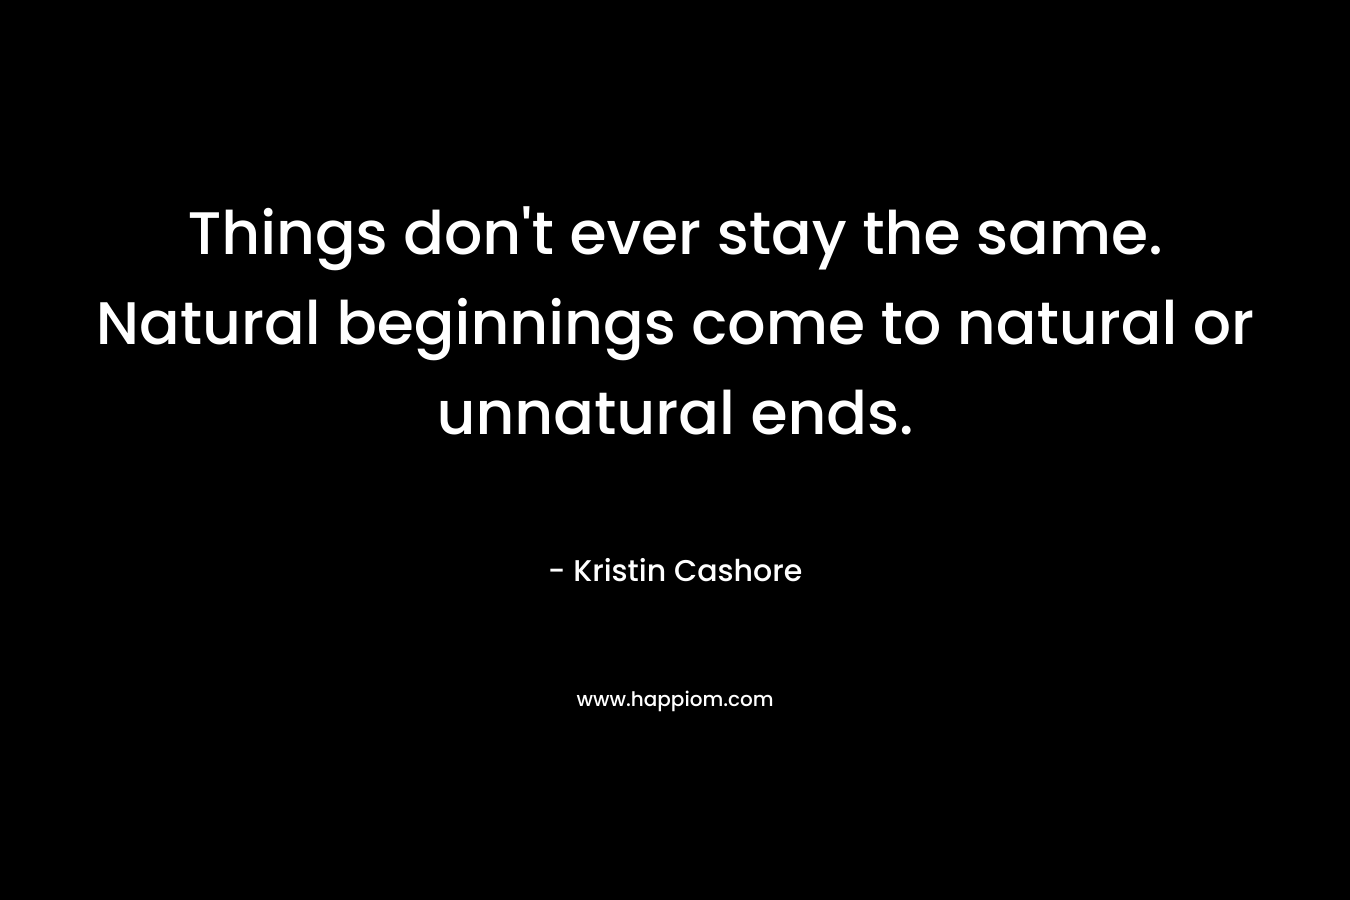 Things don't ever stay the same. Natural beginnings come to natural or unnatural ends.